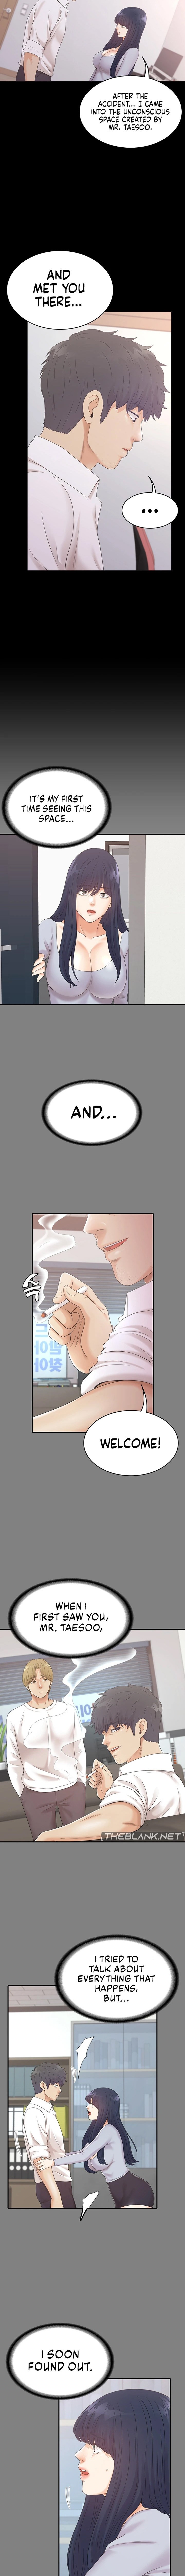 stuck-in-time-chap-23-4